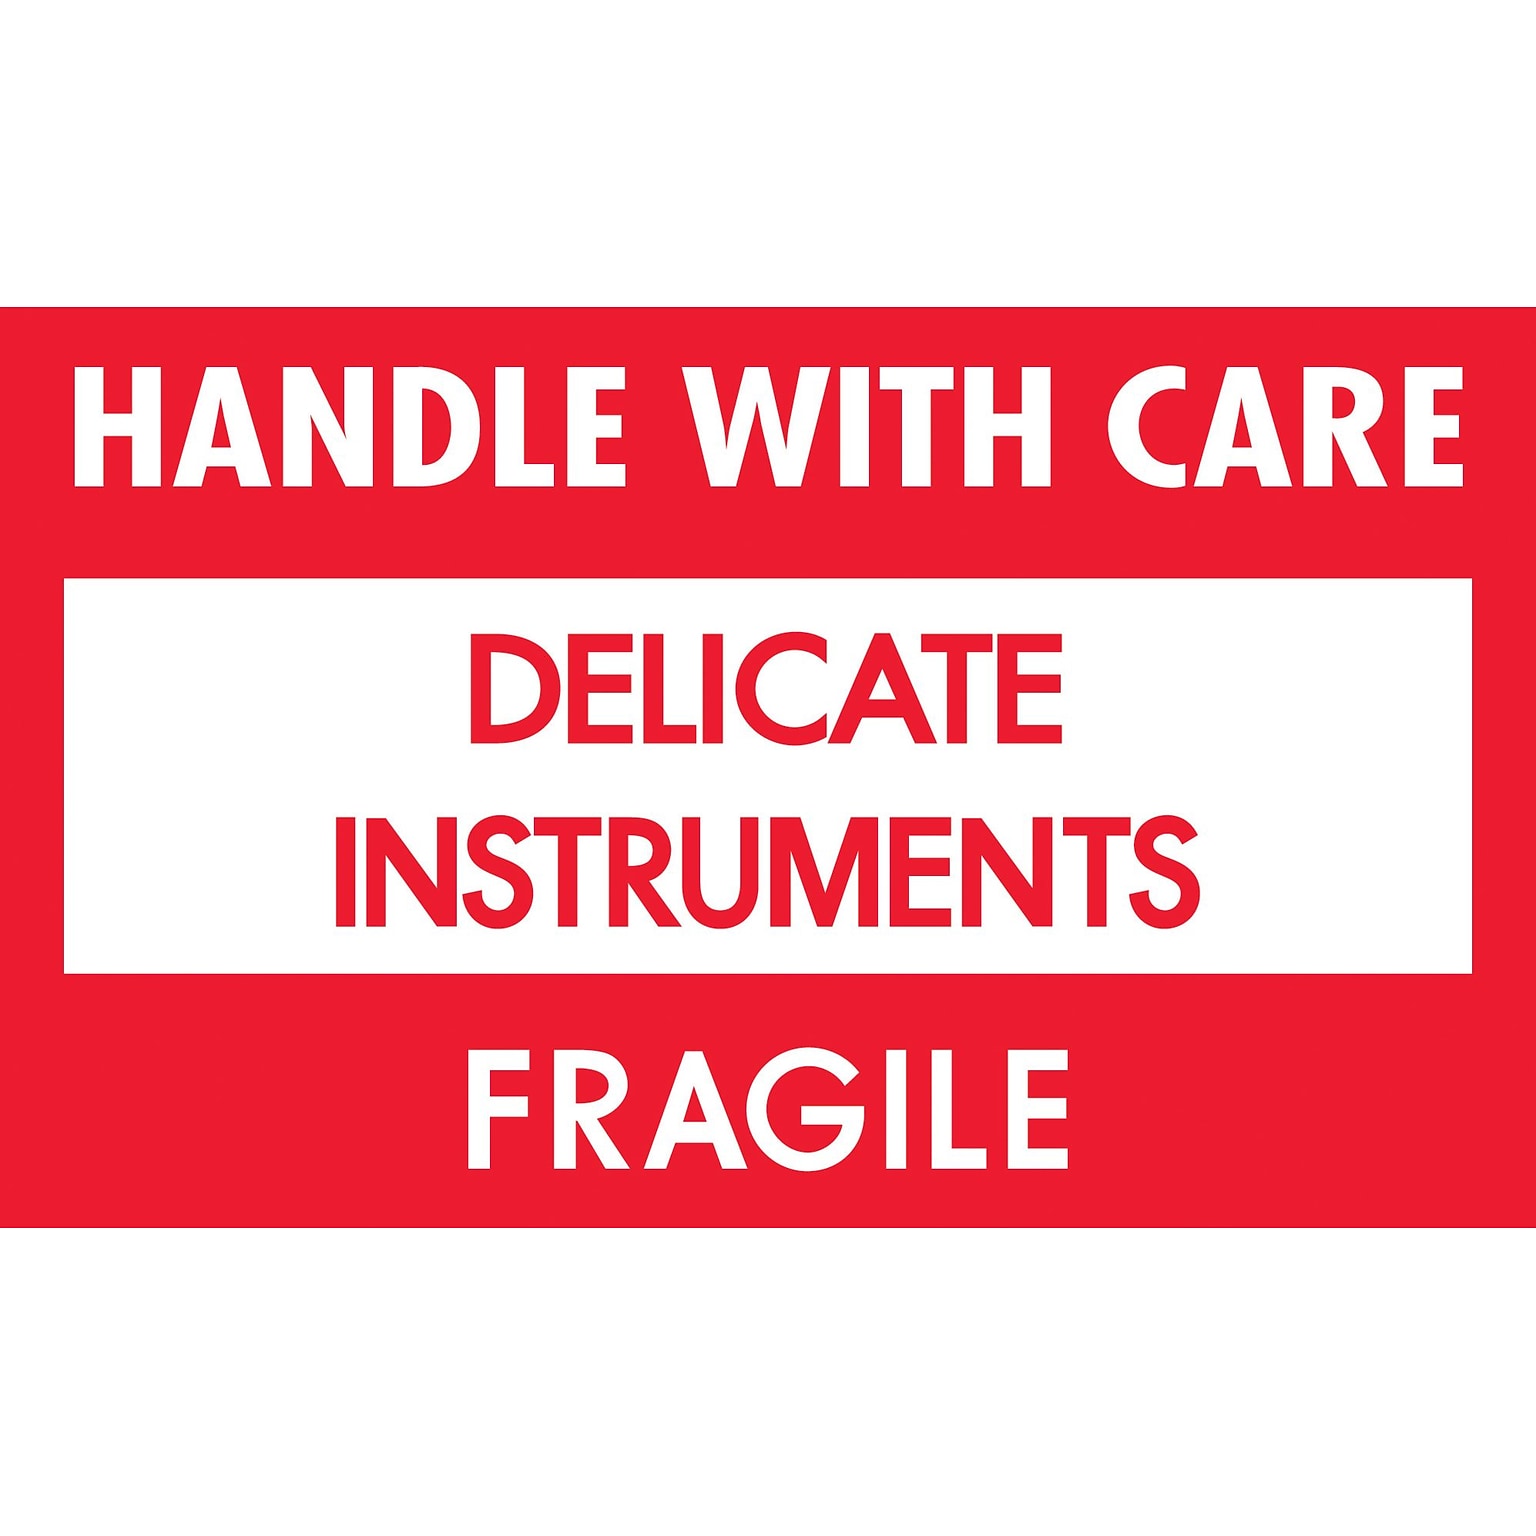 Tape Logic Delicate Instruments - HWC Shipping Label, 3 x 5, 500/Roll